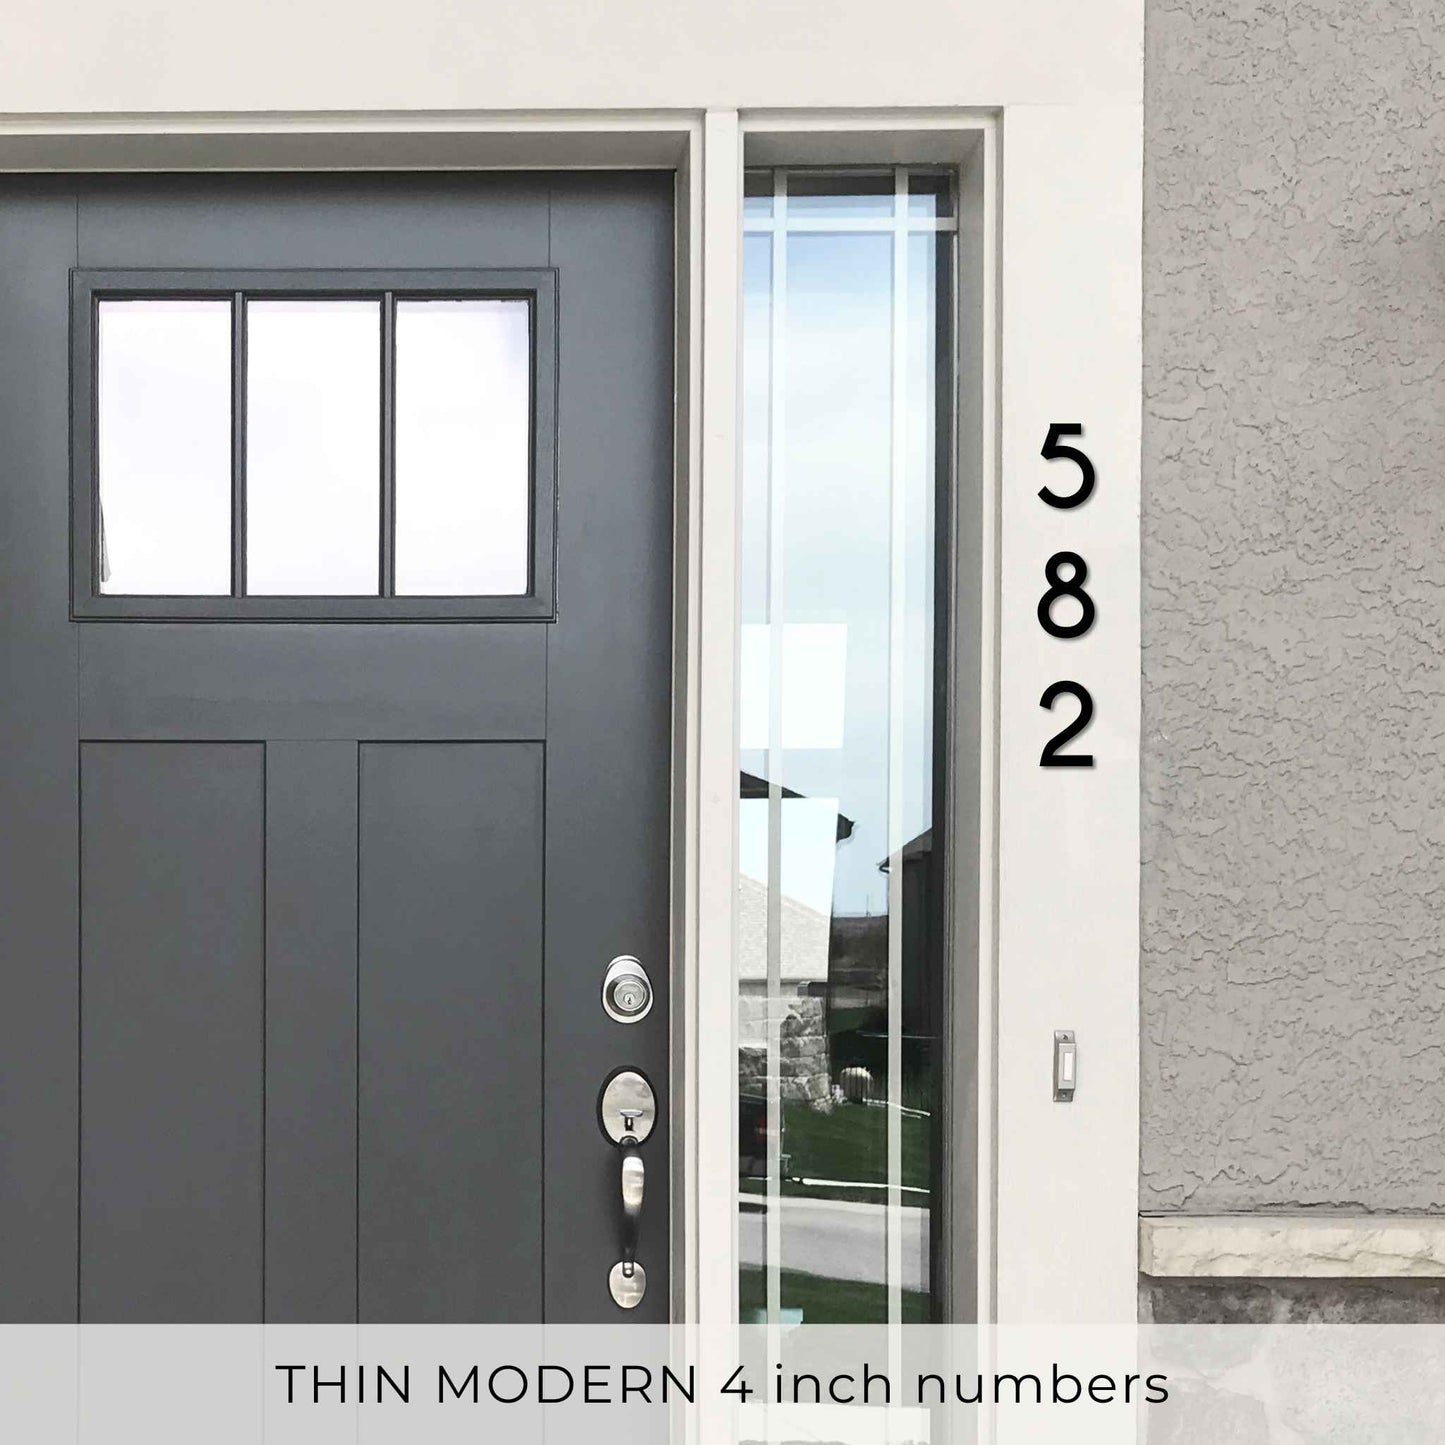 4 inch THIN MODERN house numbers and letters